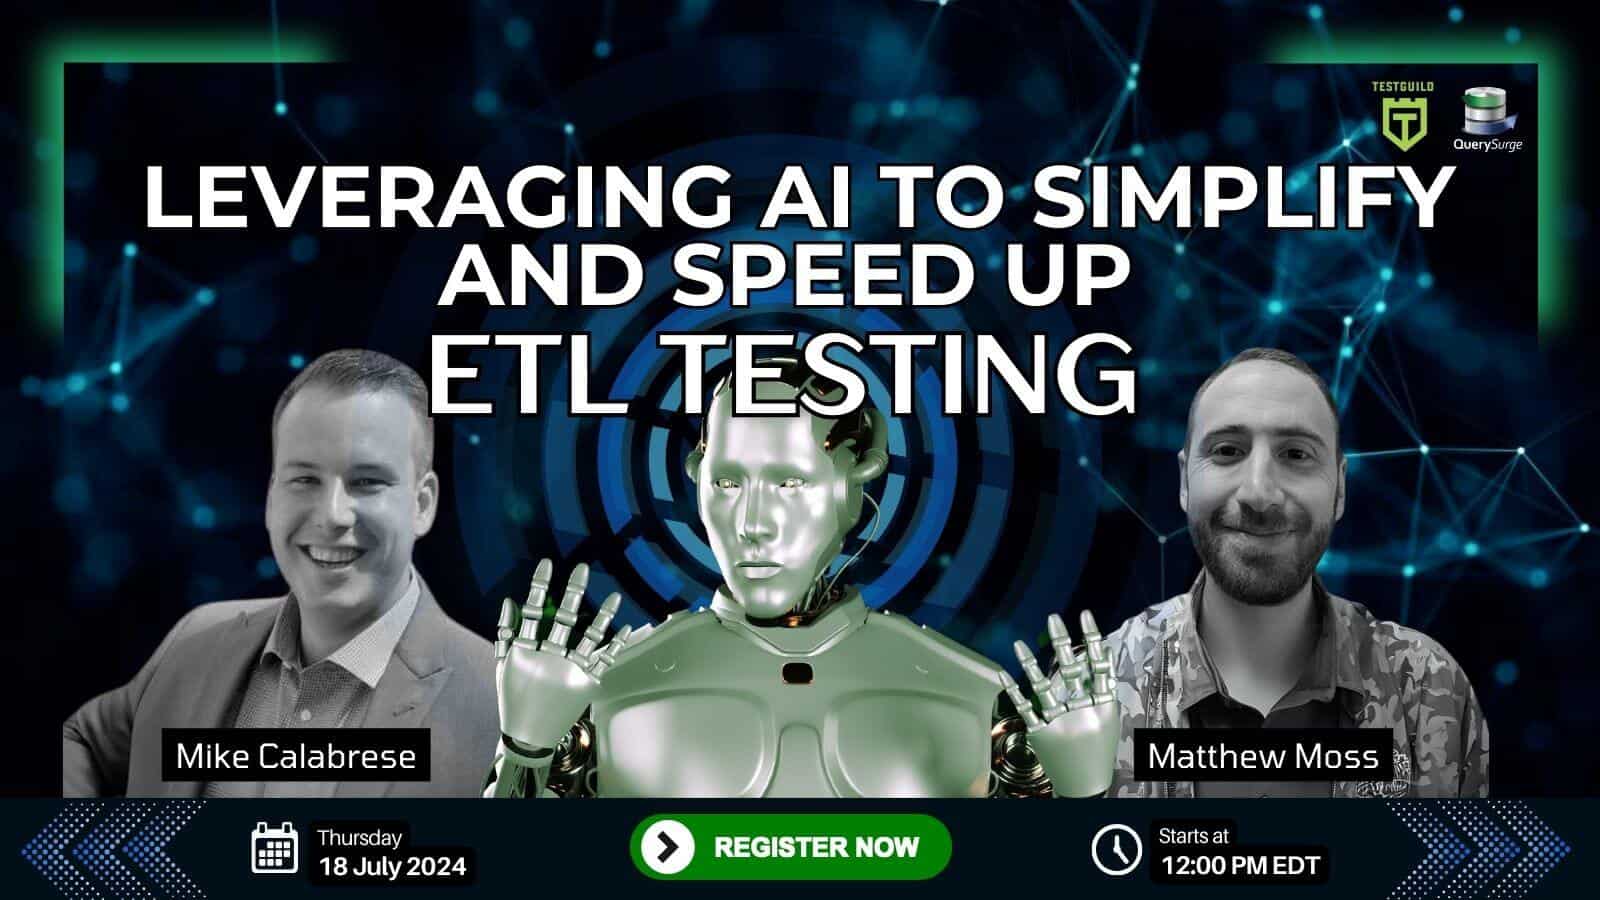 Webinar advertisement featuring a robot and two speakers, Mike Calabrese and Matthew Moss, promoting a session titled "Leveraging AI to Simplify and Speed Up ETL Testing" scheduled for 18 July 2024 at 12:00 PM EDT.